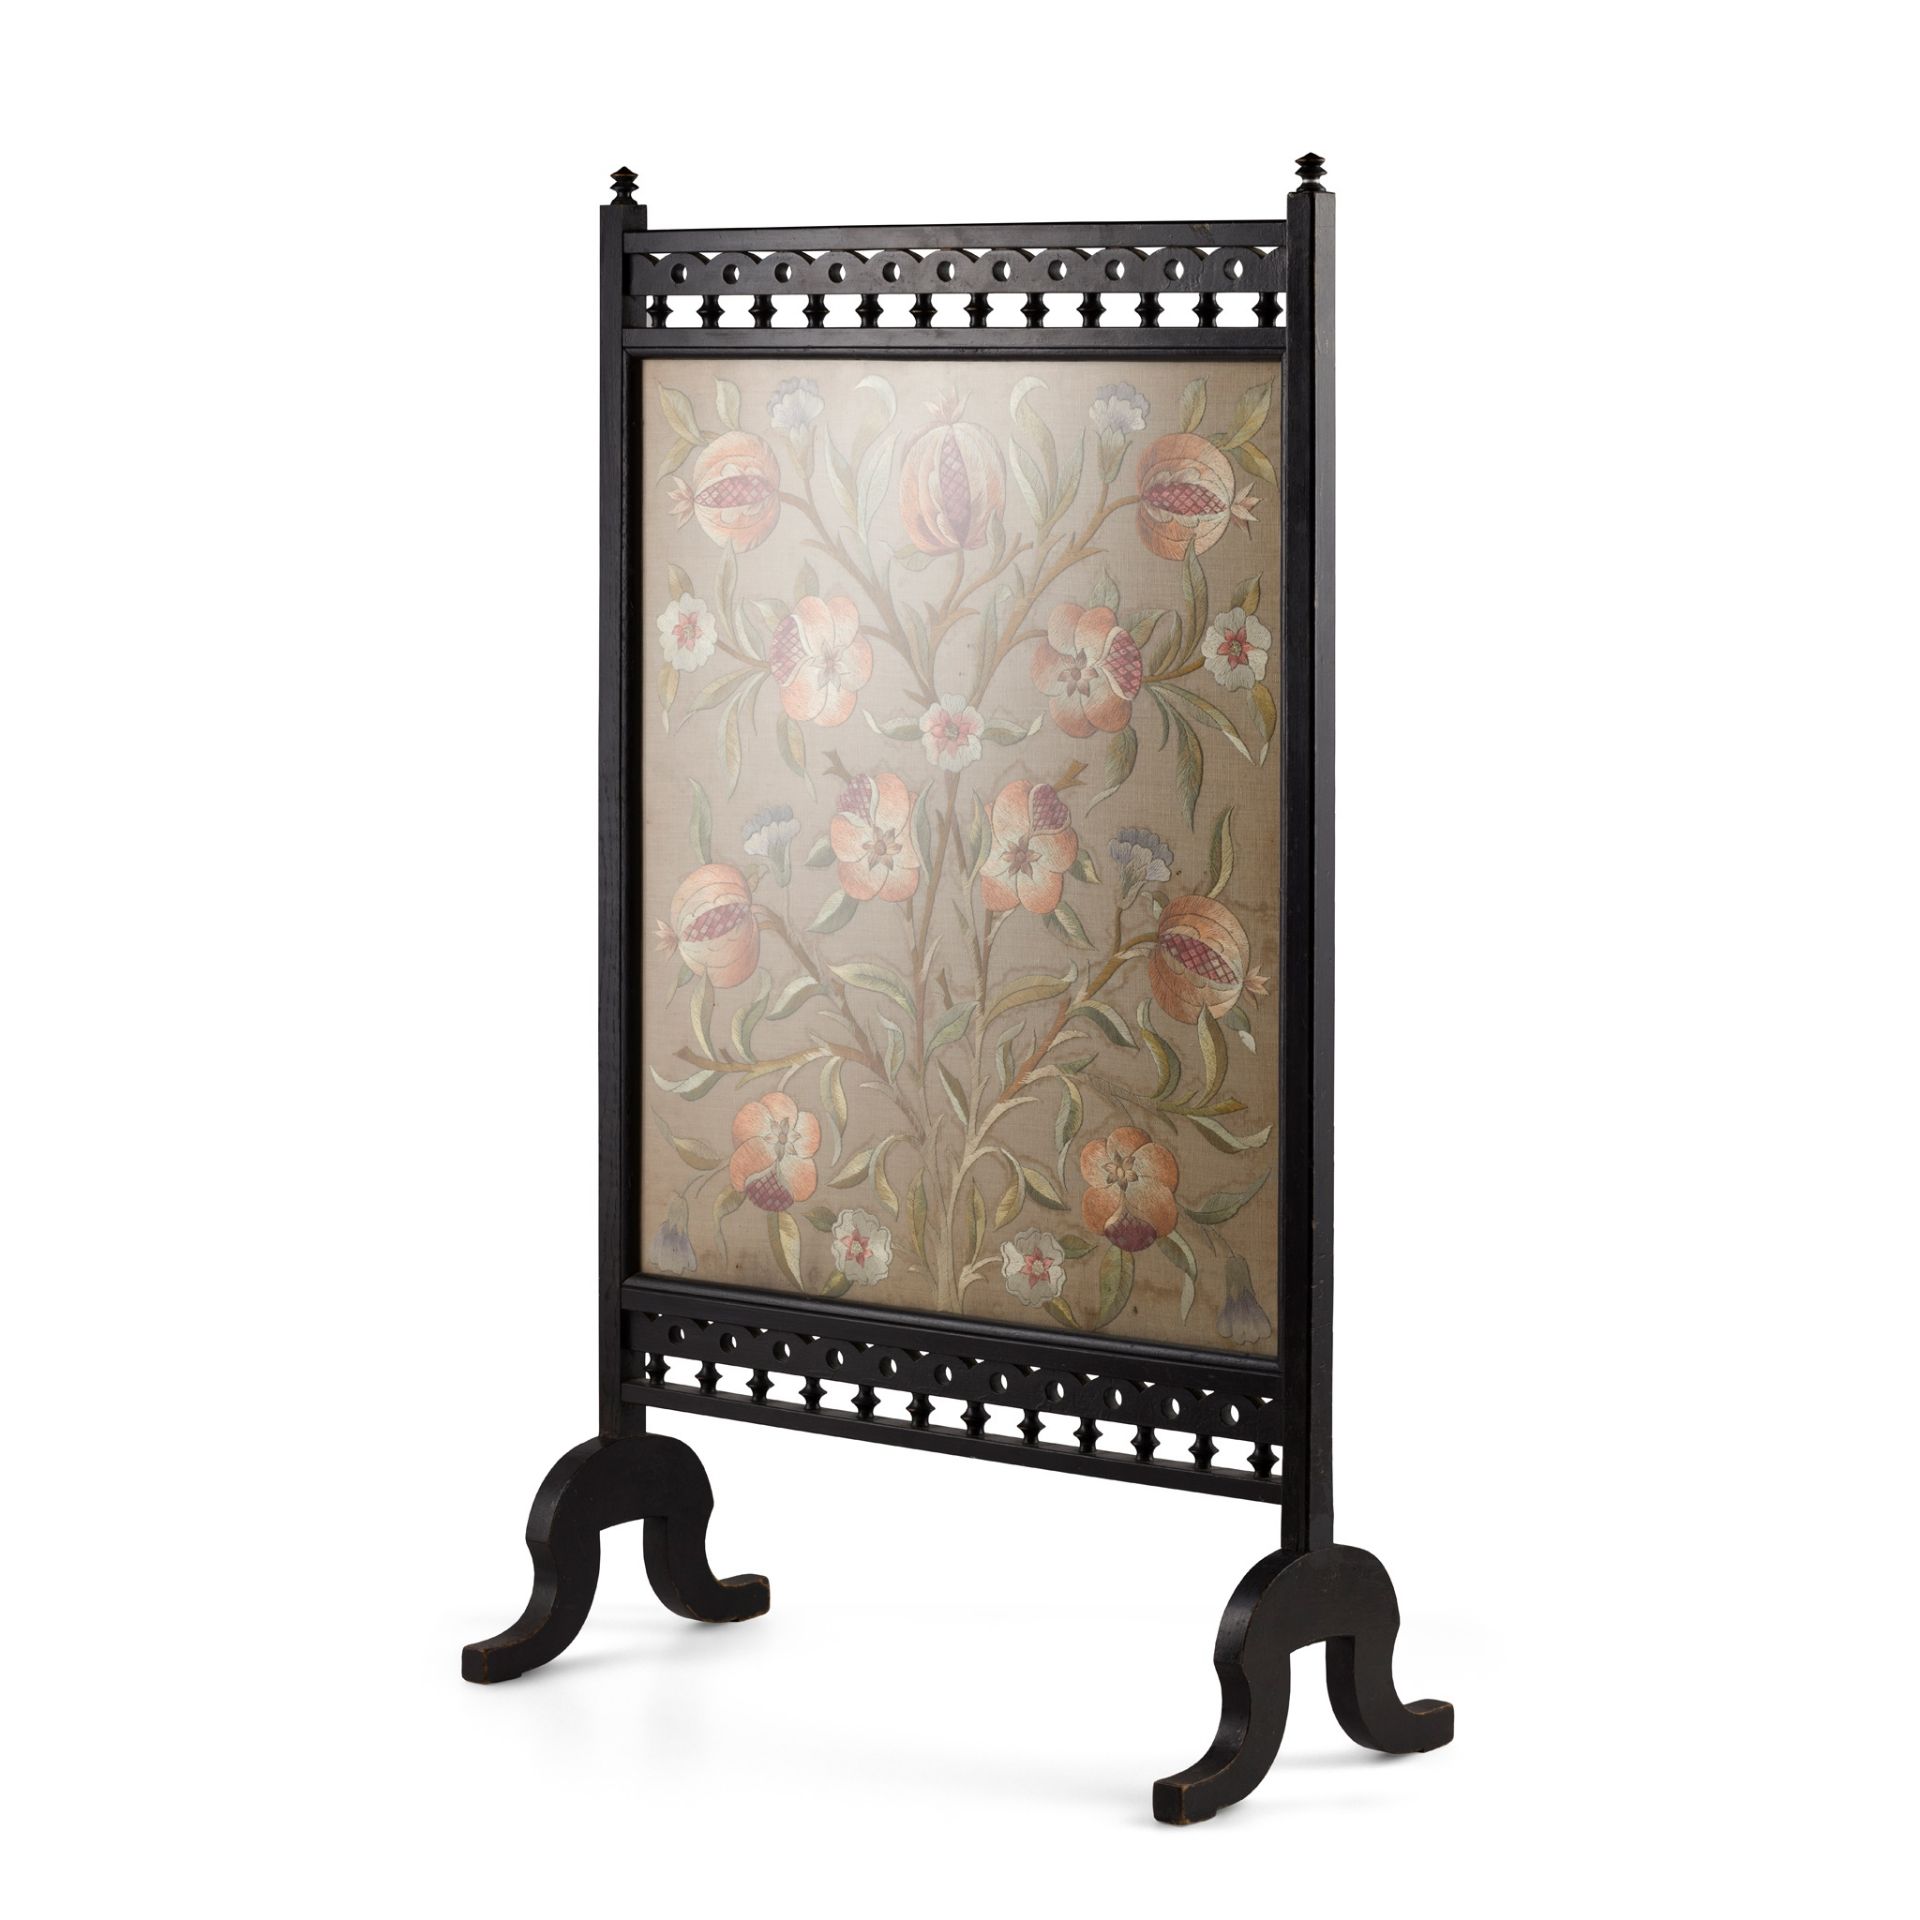 ENGLISH ARTS & CRAFTS EMBROIDERED FIRESCREEN, CIRCA 1900 - Image 2 of 2